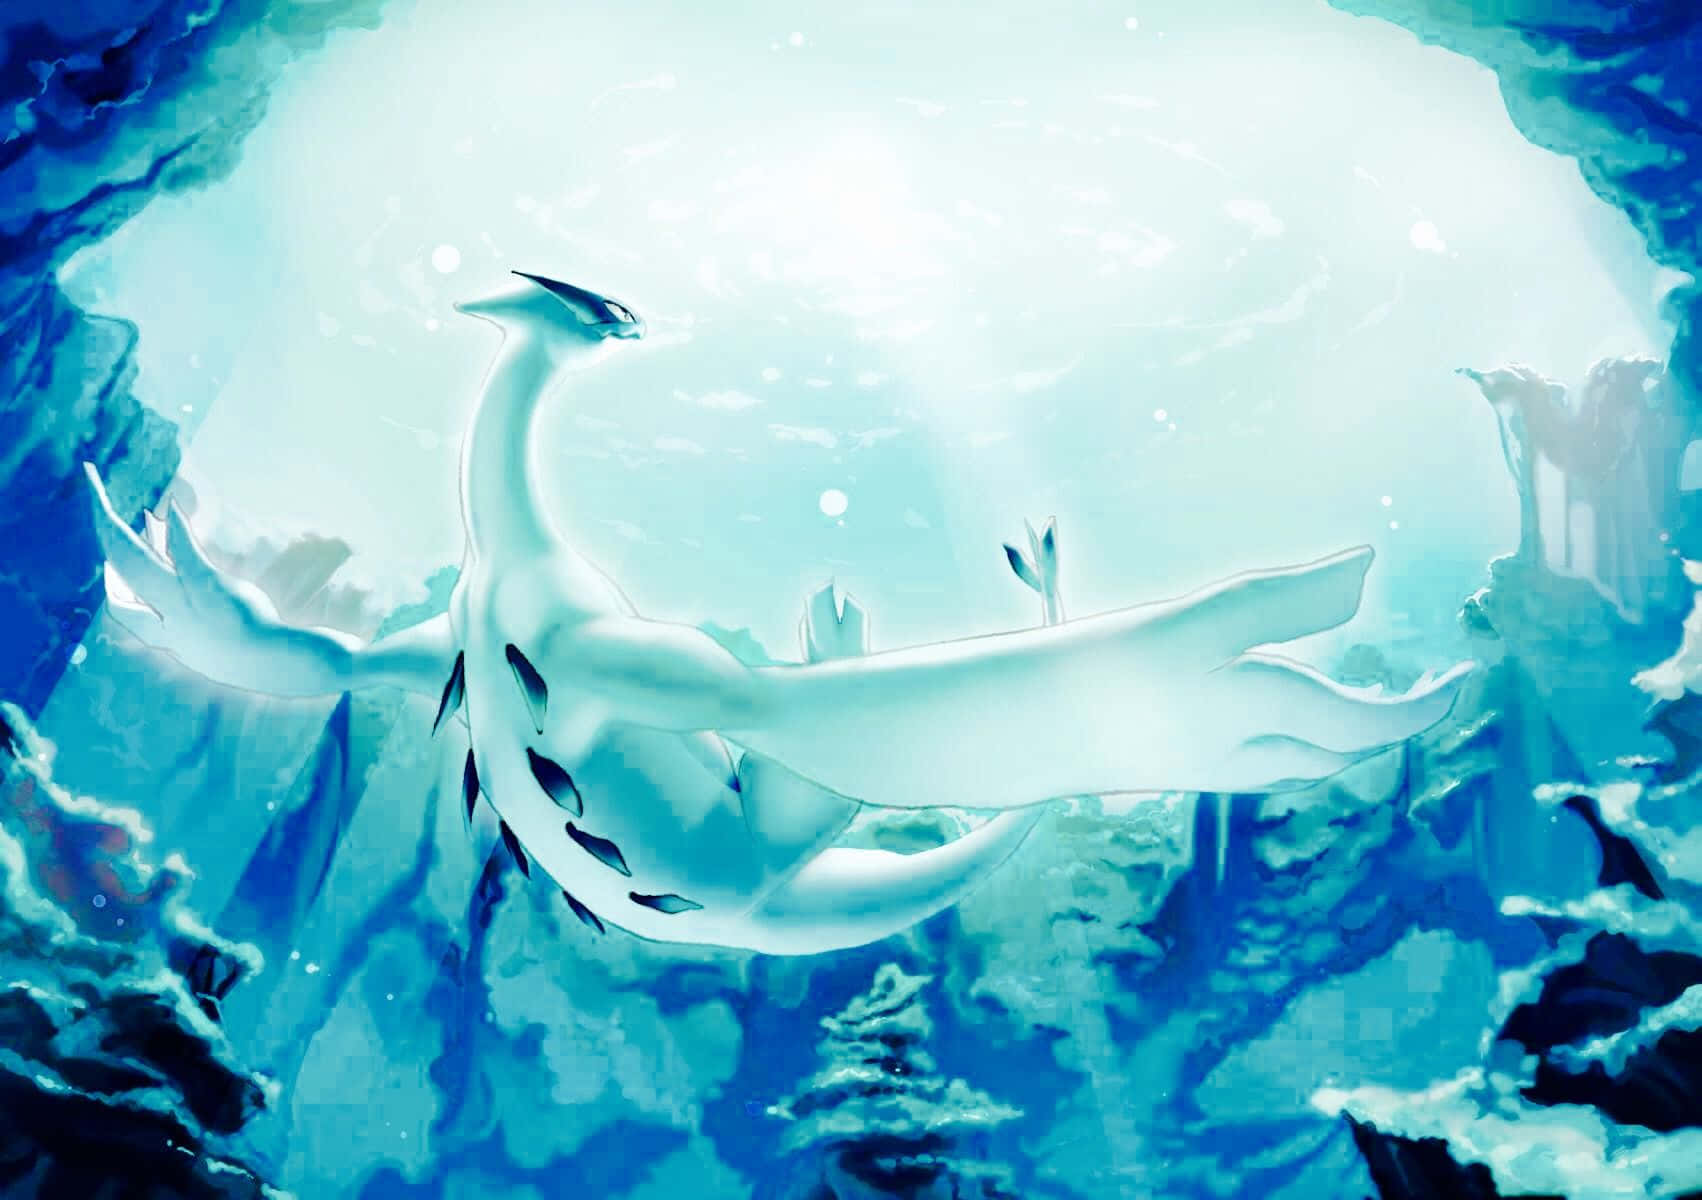 Lugia soars over the clouds in this majestic wallpaper.